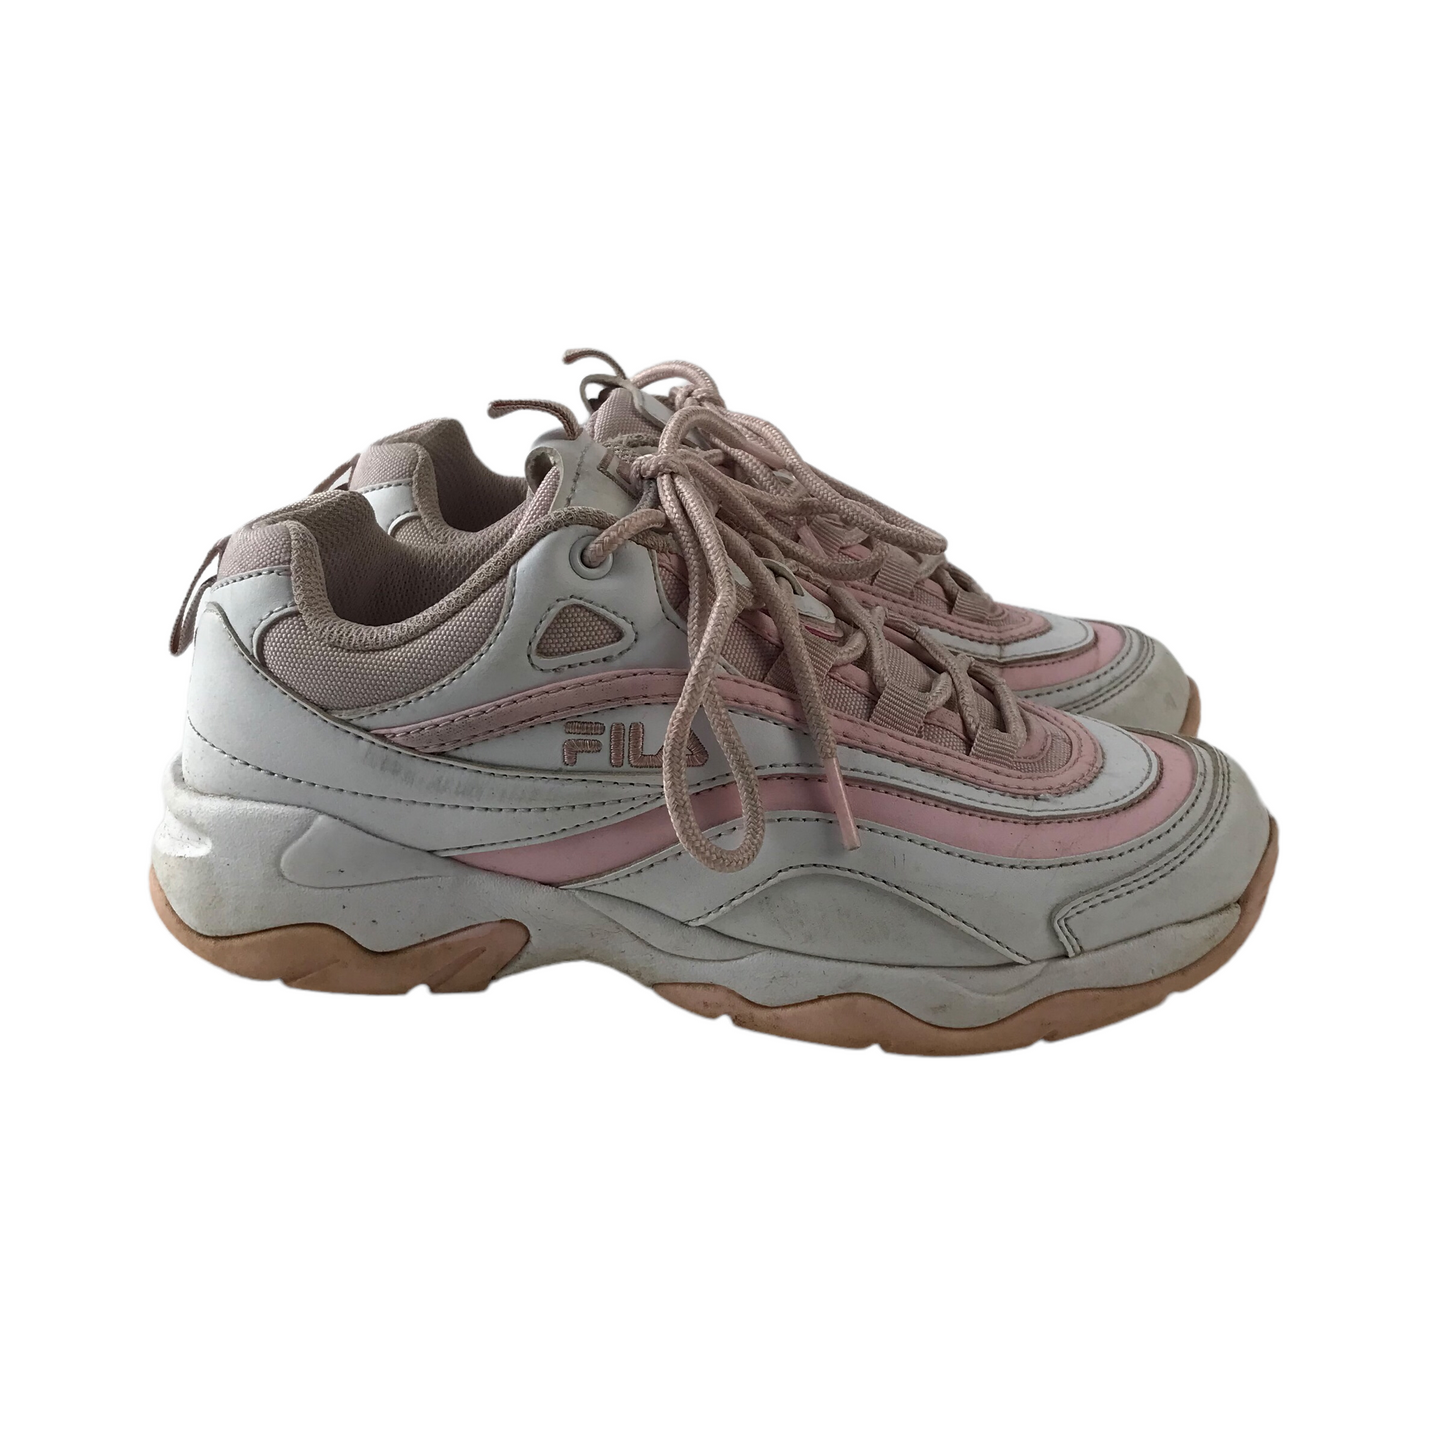 Fila White and Light Pink Trainers Size UK 5